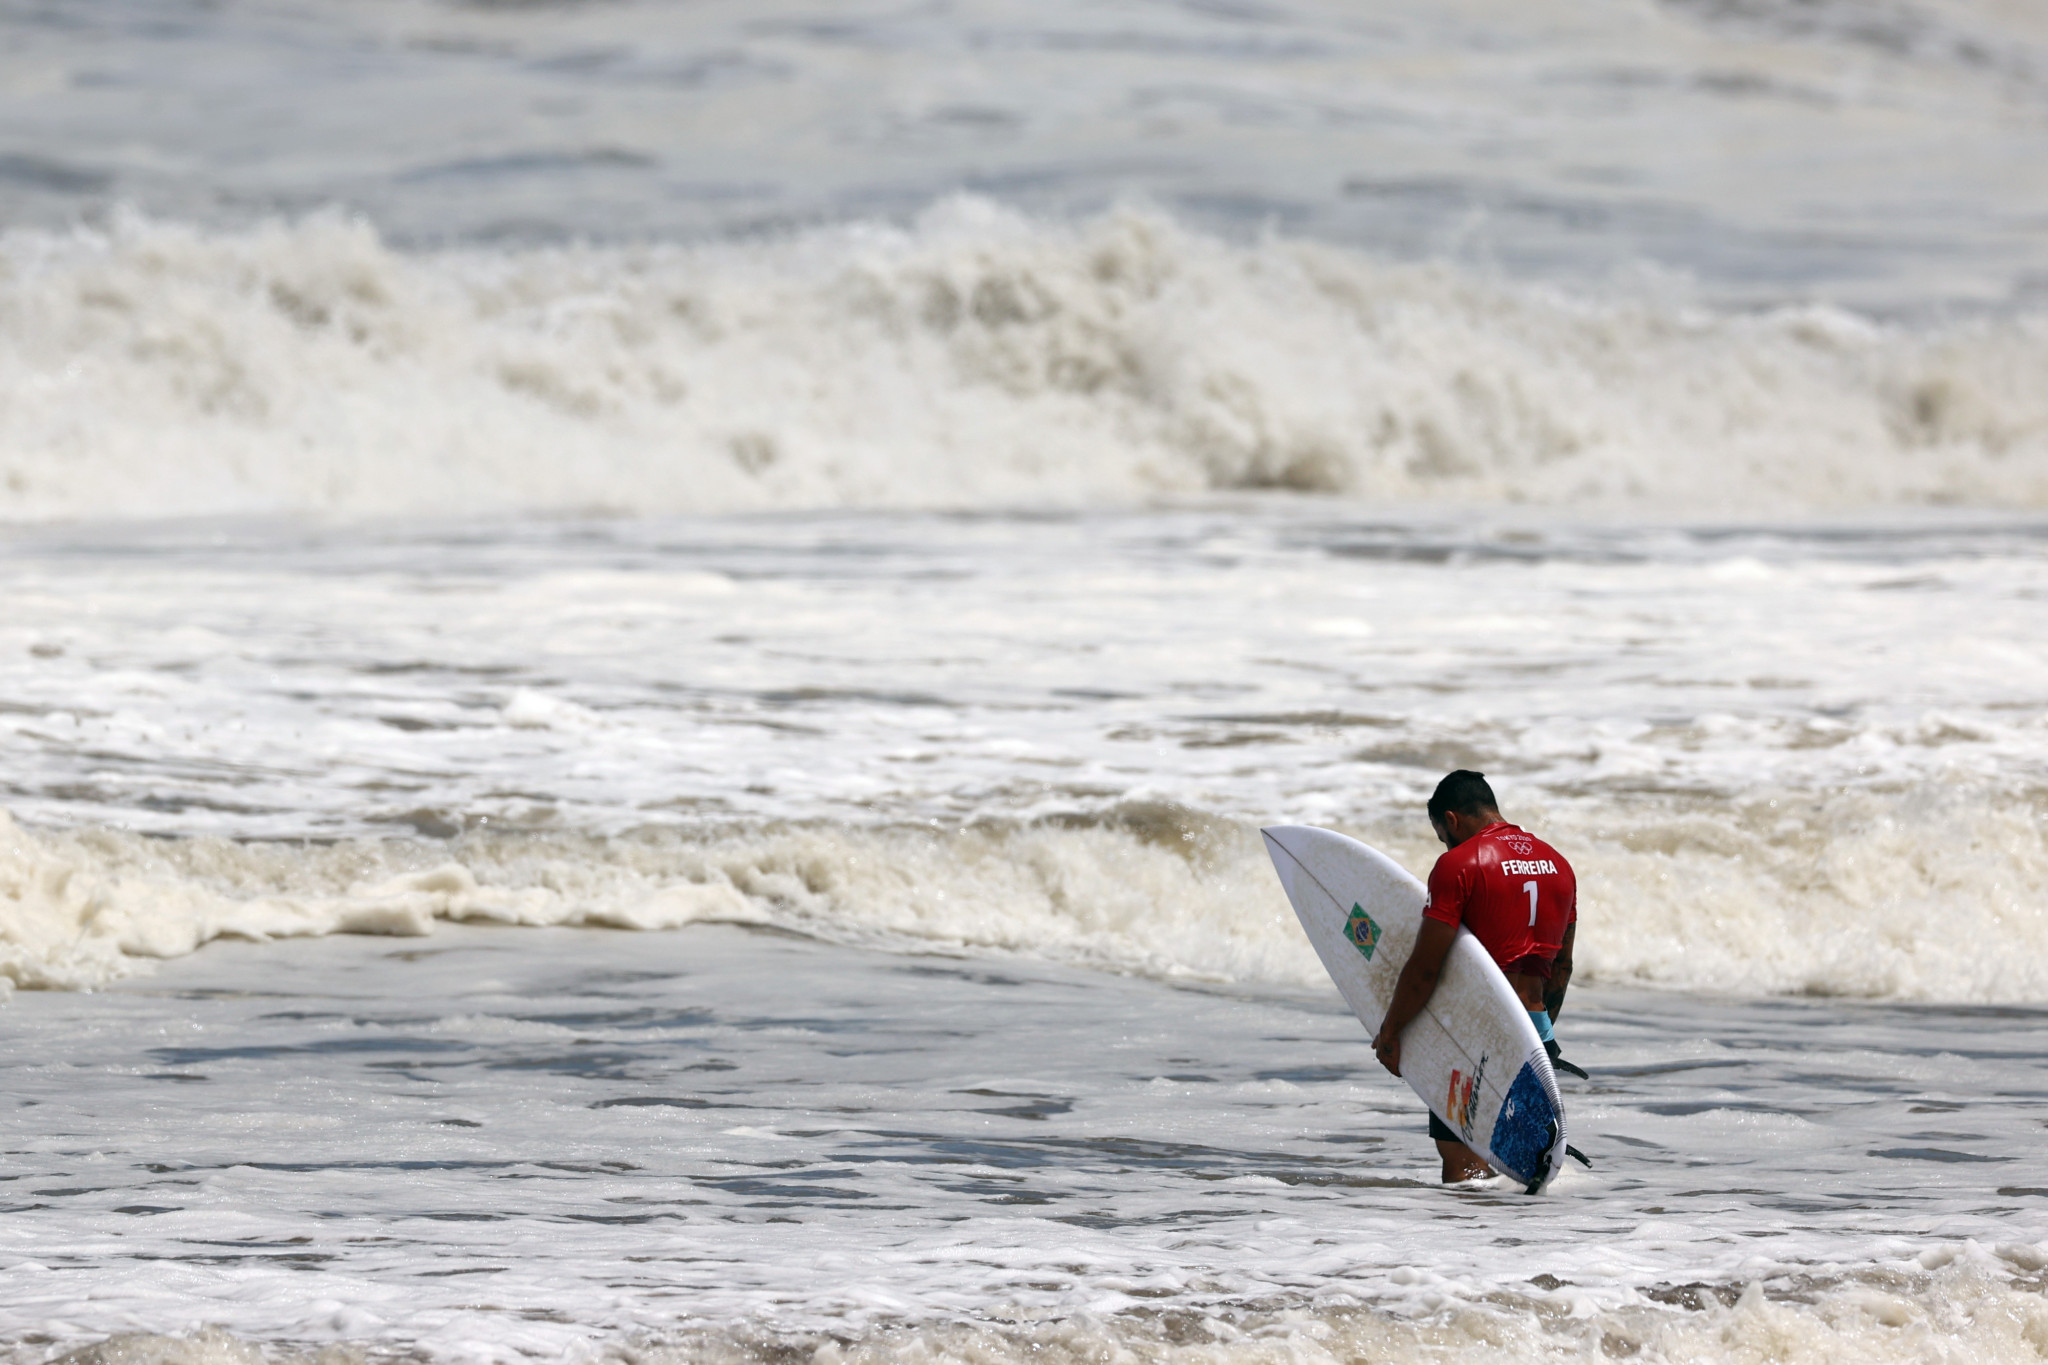 Olympic champion Ferreira crashes out of World Surf League Corona Open Mexico